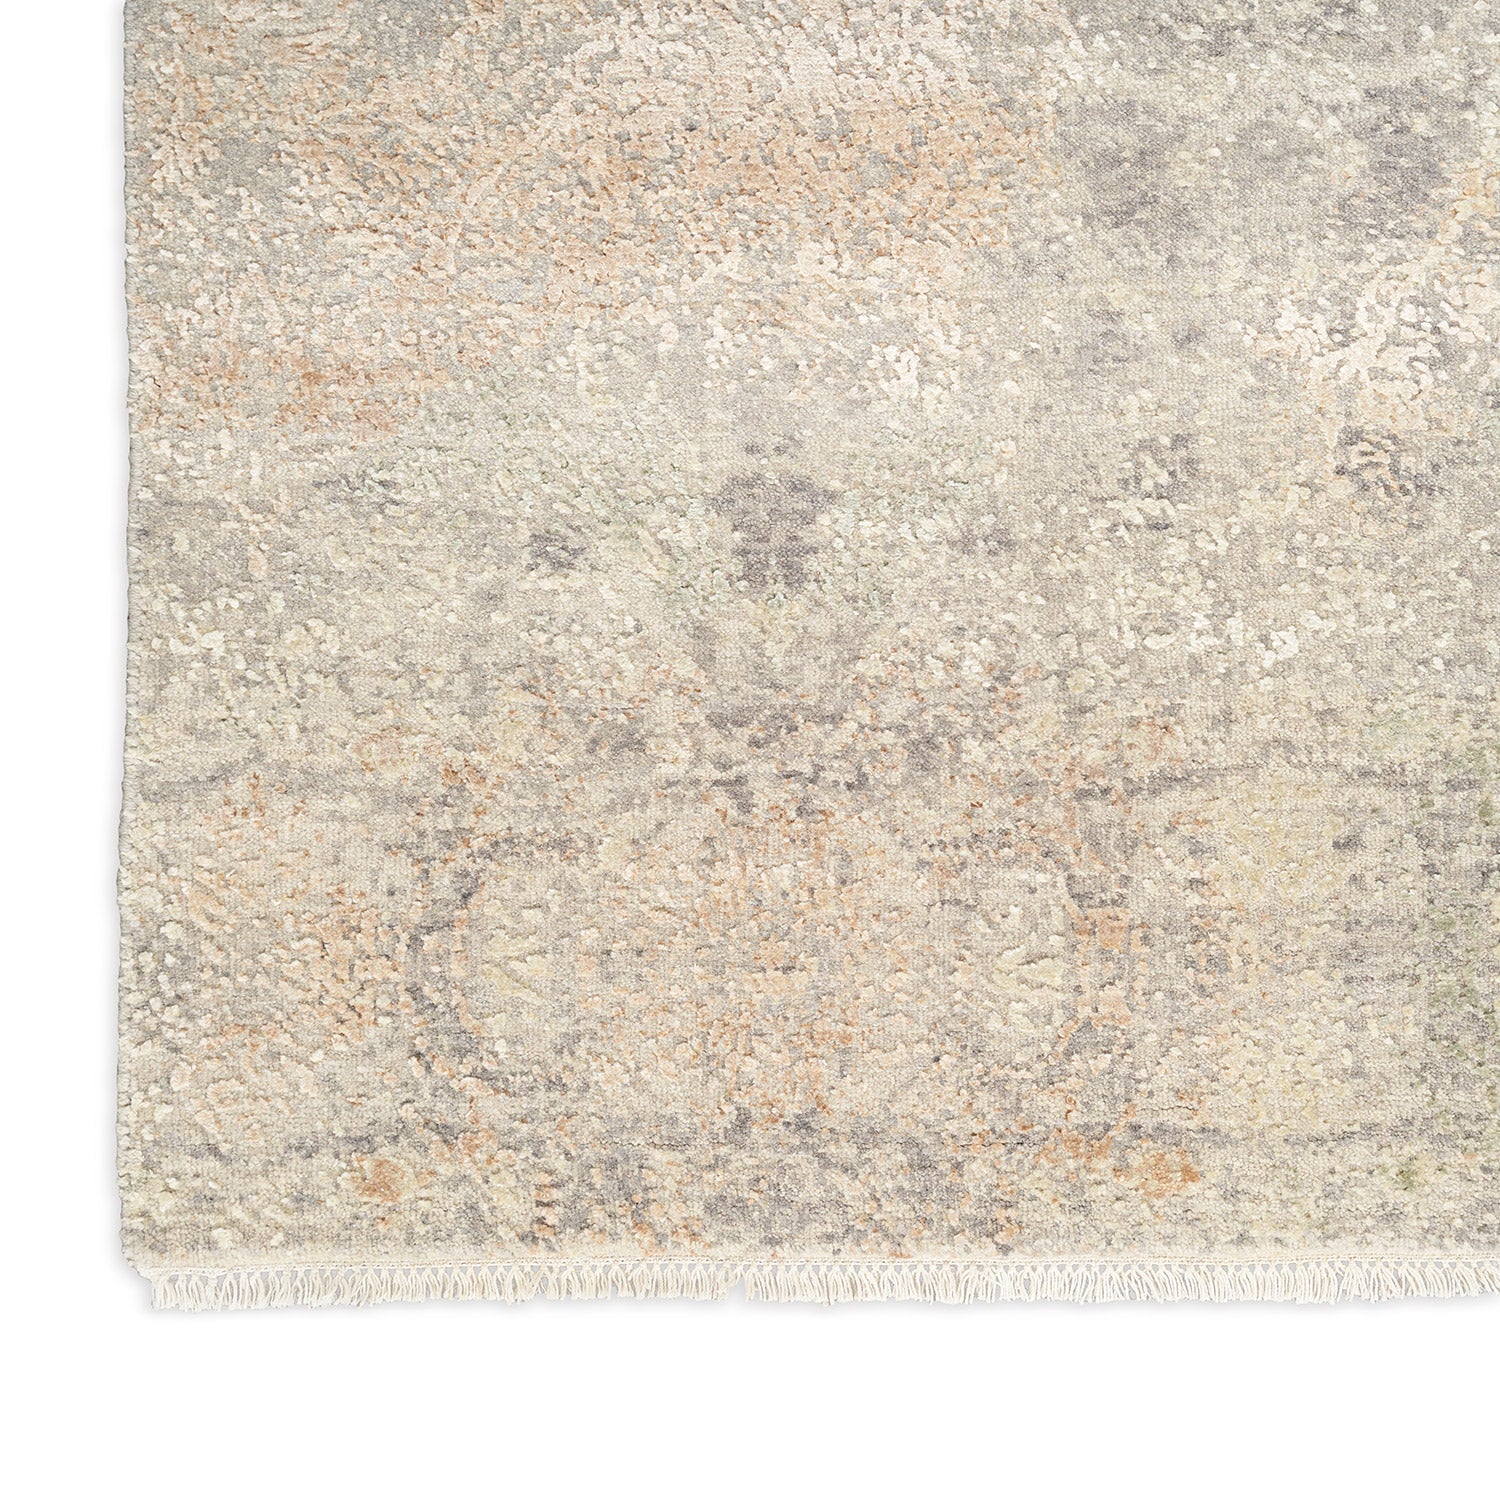 Vintage-style distressed rug with intricate floral motifs in neutral tones